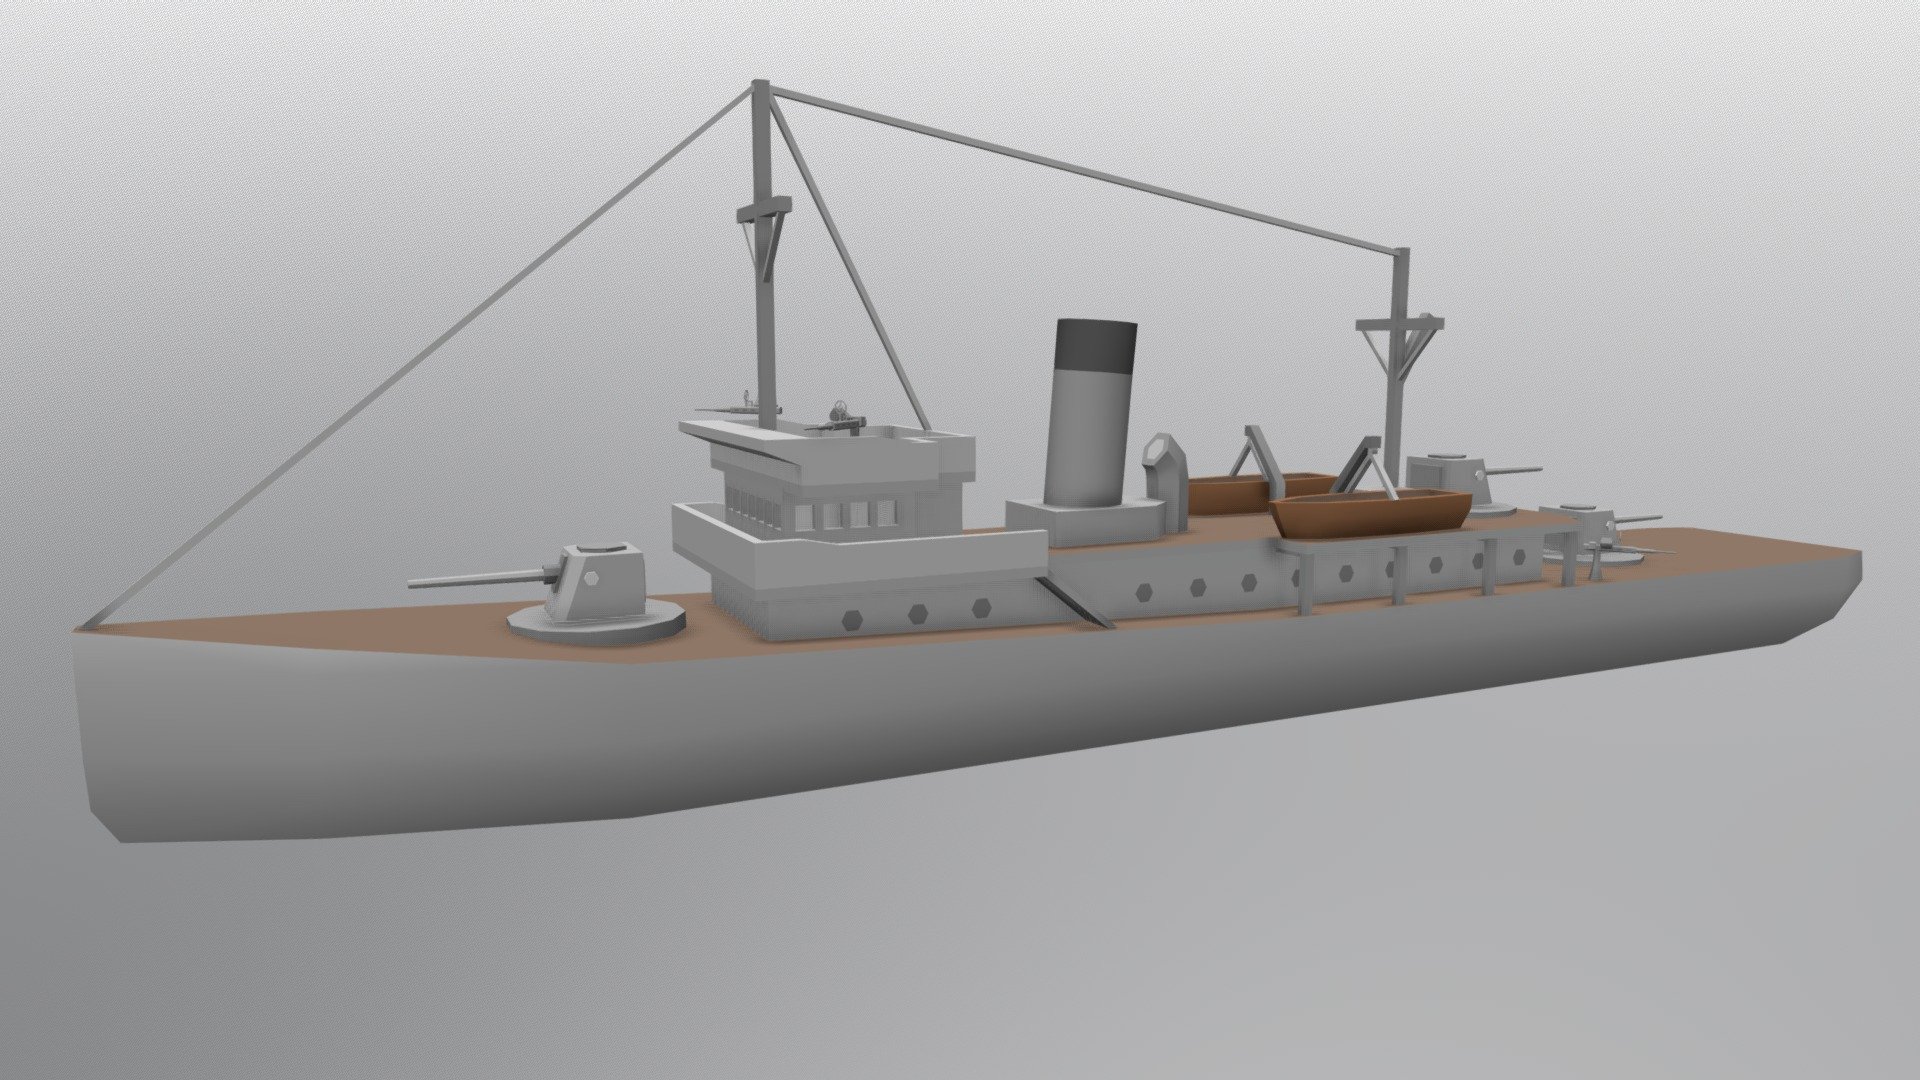 Uusimaa was a gunboat that served in the Finnish Navy during World War II. Built in 1917. Made for Unturned 3d model